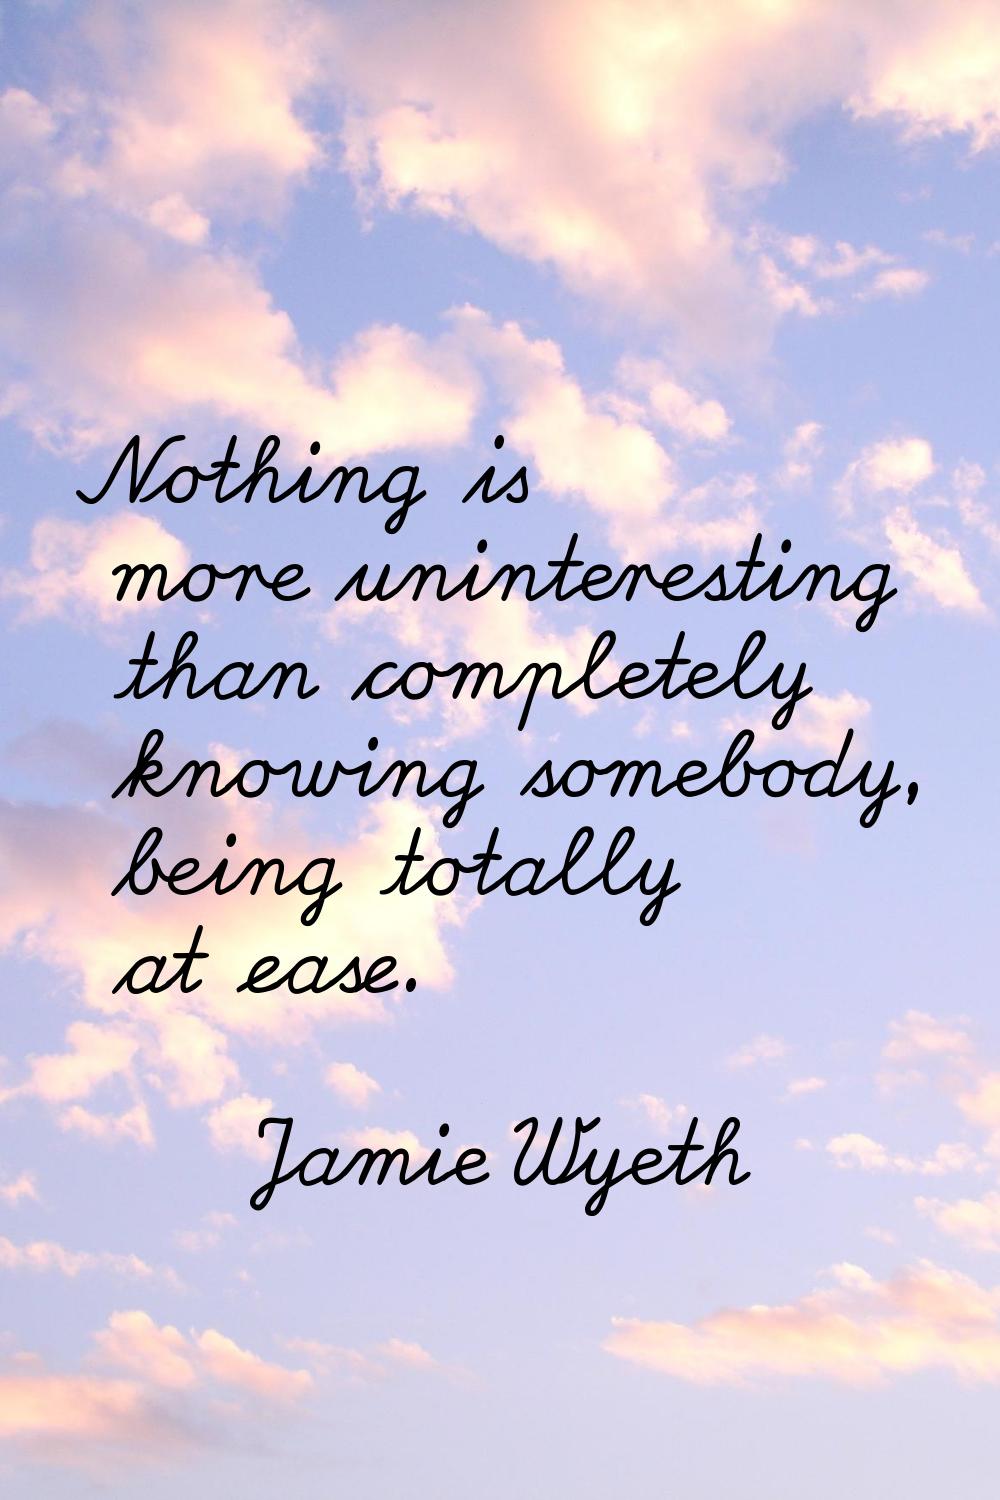 Nothing is more uninteresting than completely knowing somebody, being totally at ease.